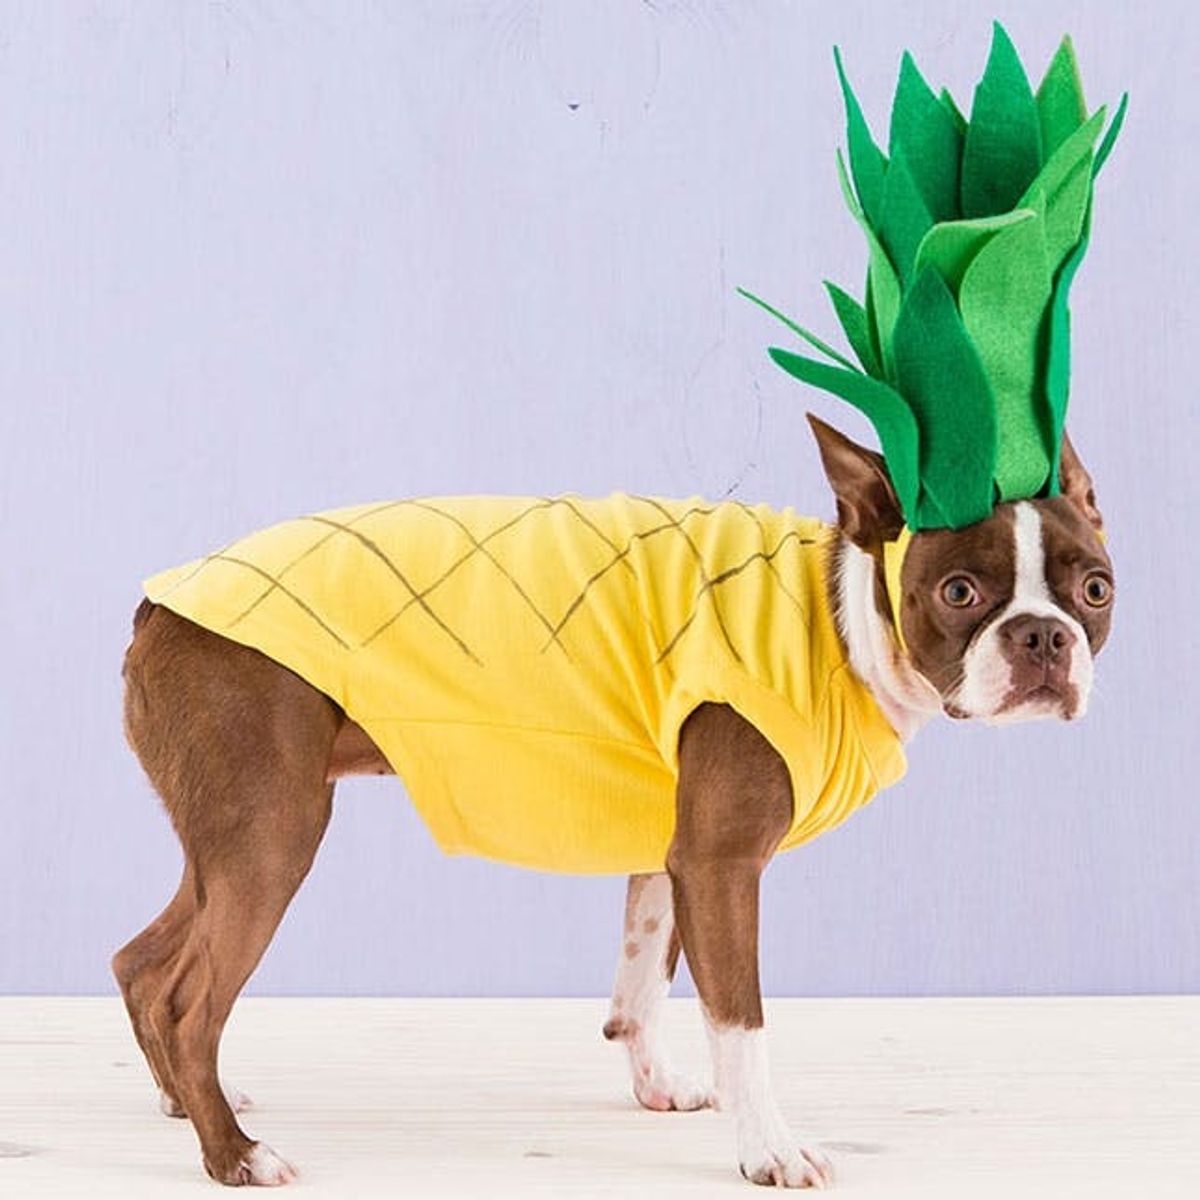 How to Dress Up Your Dog in a DIY Pineapple Costume